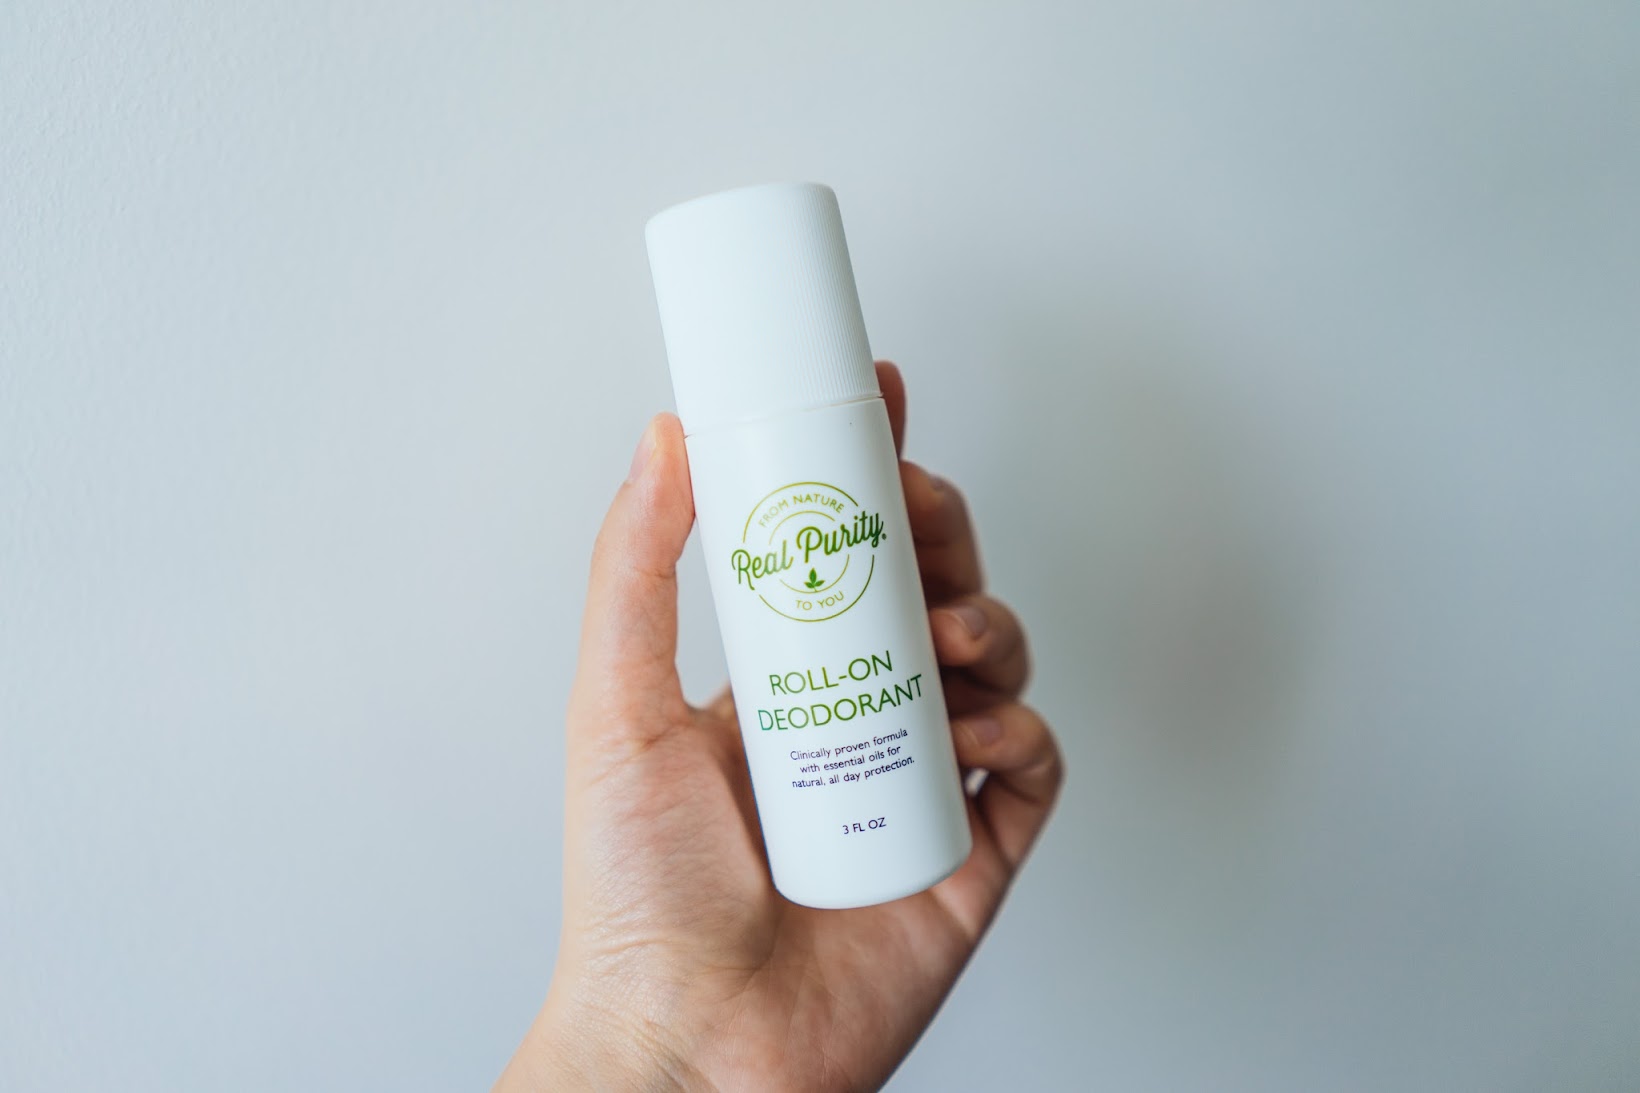 julia The best natural Roll-On Deodorant I've ever used! Real Purity Deodorant Review